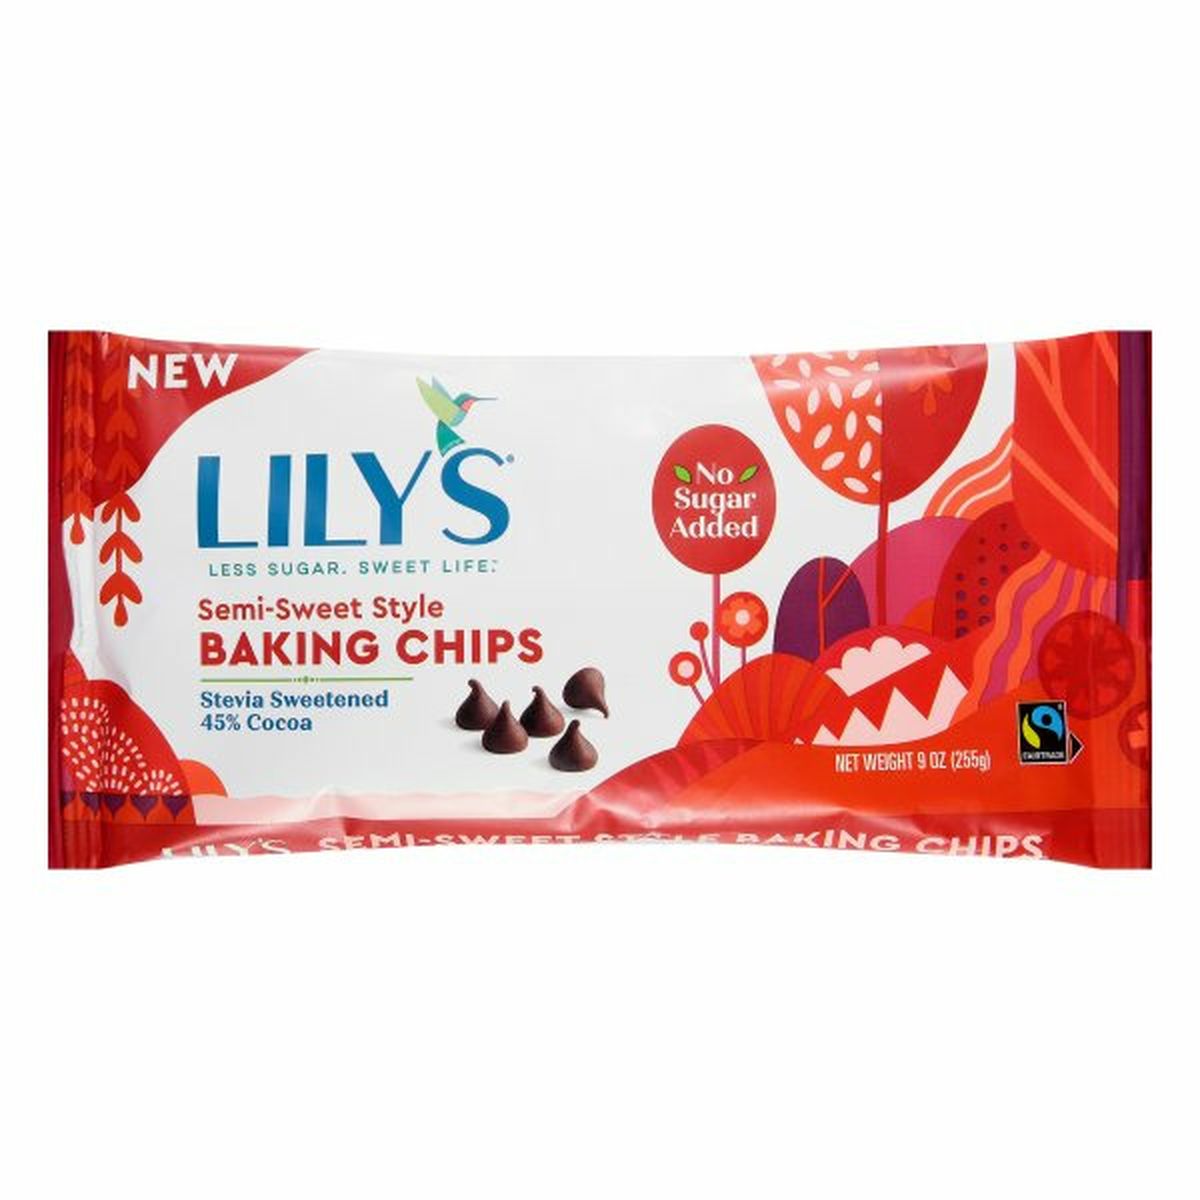 Calories in Lily's Baking Chips, Semi-Sweet Style, 45% Cocoa